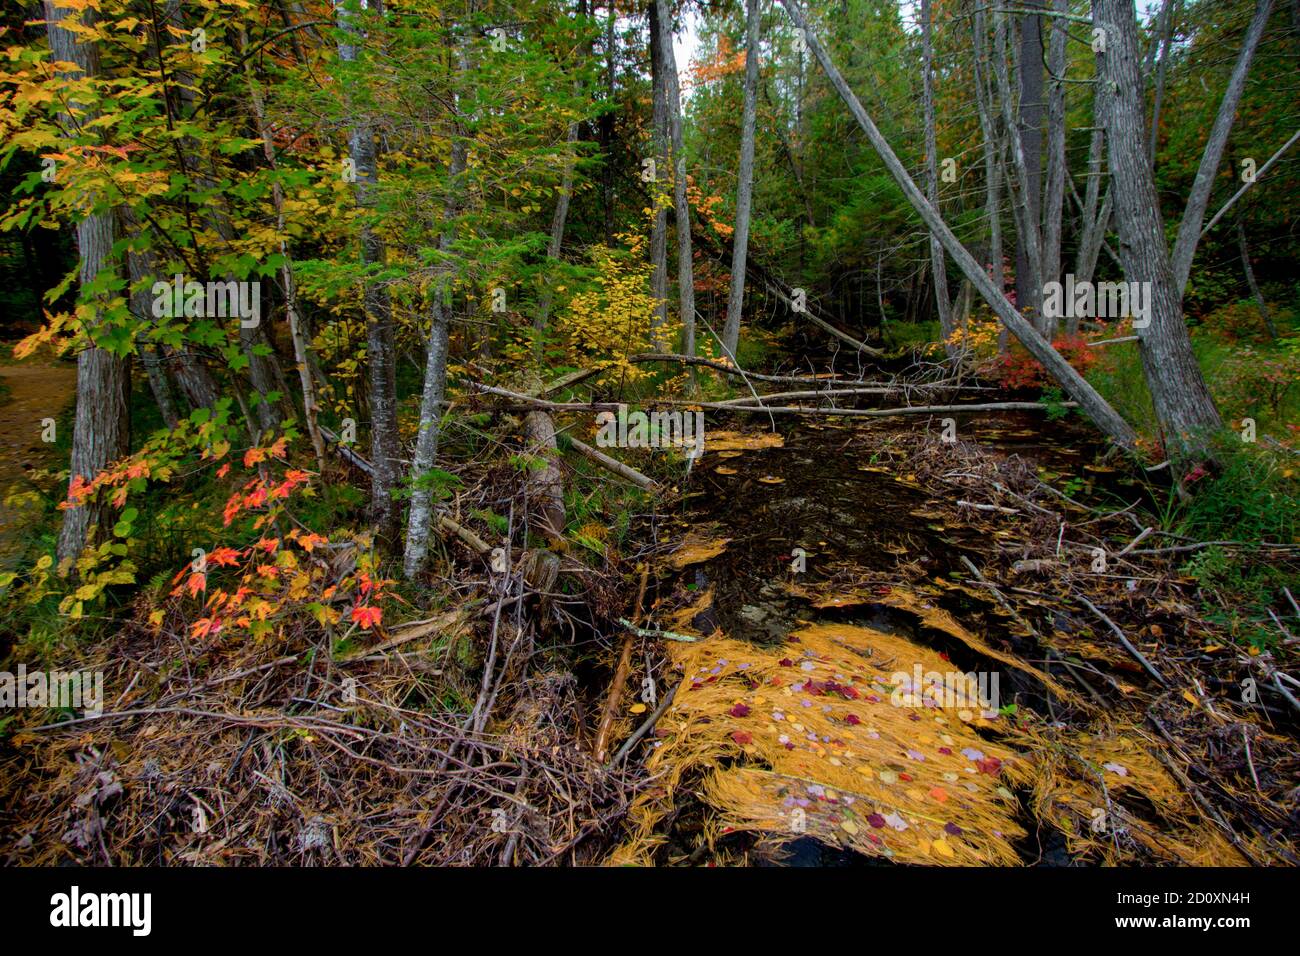 Autumn Forest Landscape. Stream through a forest with fall foliage in northern Michigan at Hartwick Pines State Park Stock Photo